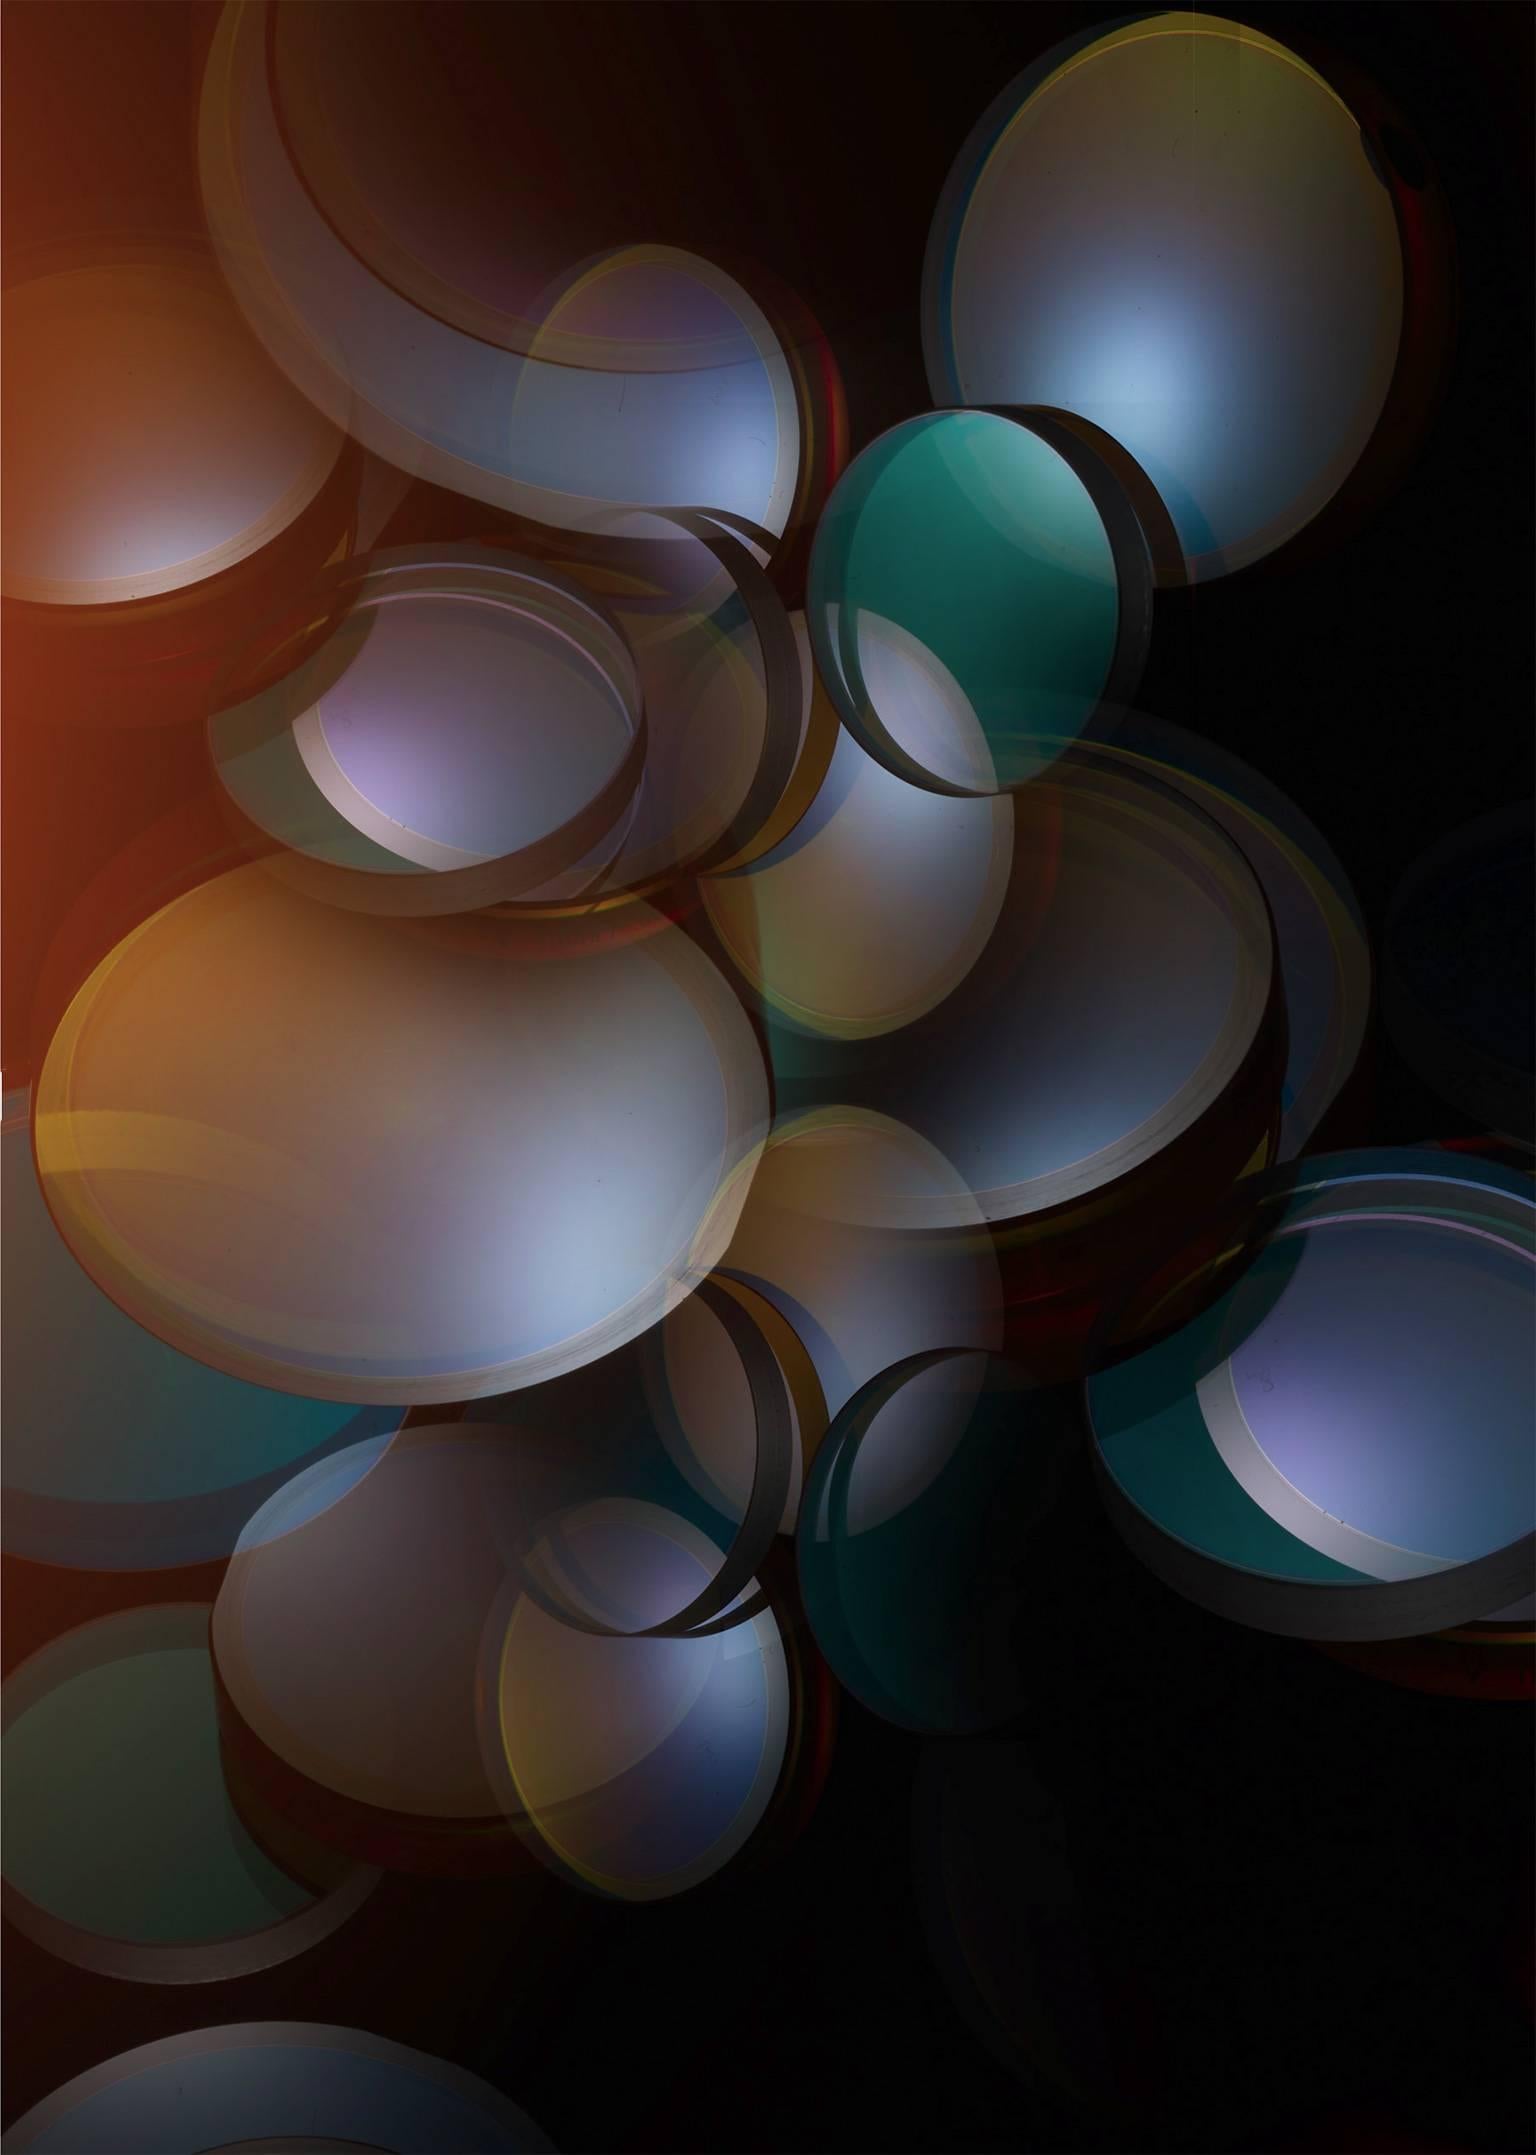 Christian Stoll Still-Life Photograph - Caleidoscope lI - abstract colored reflections and patterns